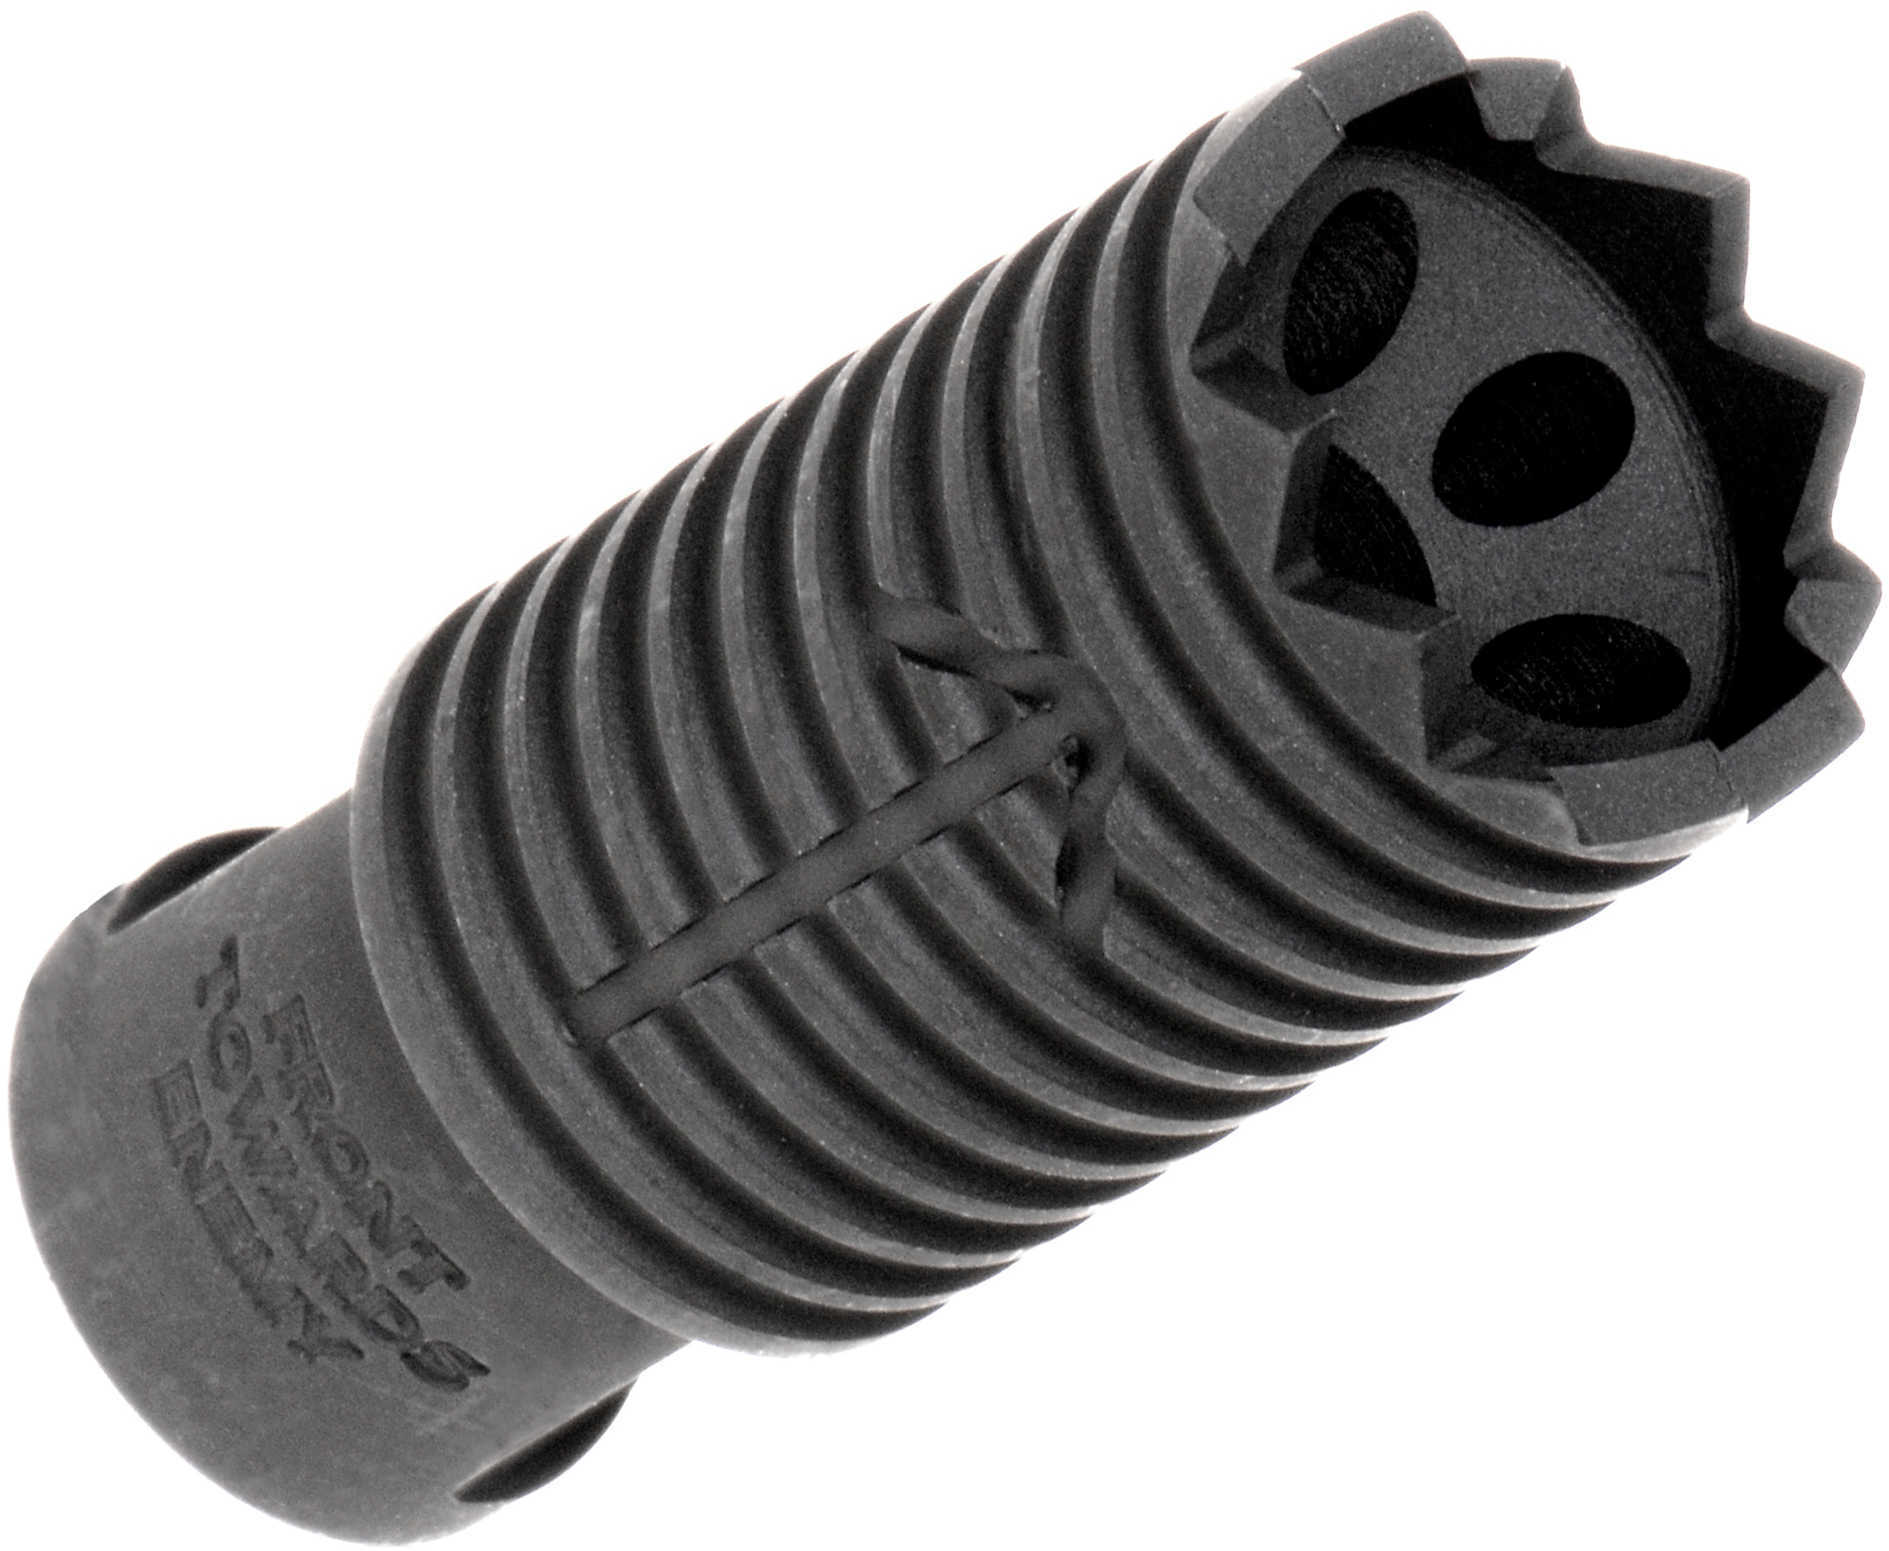 Troy Claymore Muzzle Brake - 6.8/7.62mm 5/8 Inch-24 Black